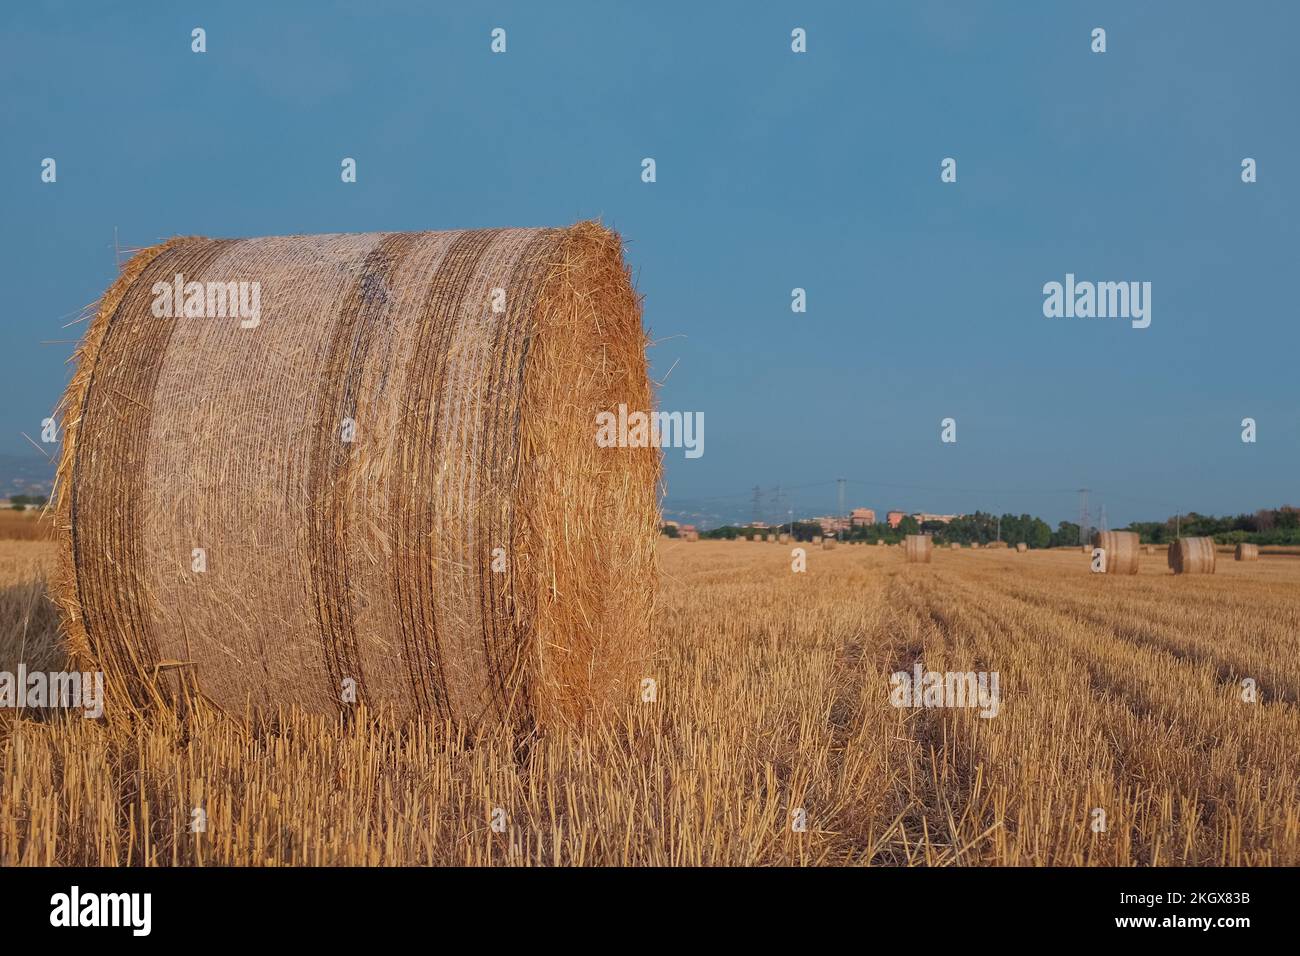 Golden hay bales on a field. Large round bundles to feed ruminant animals. Outdoor park in Rome, Italy. Agriculture, farm, and harvest background. Stock Photo